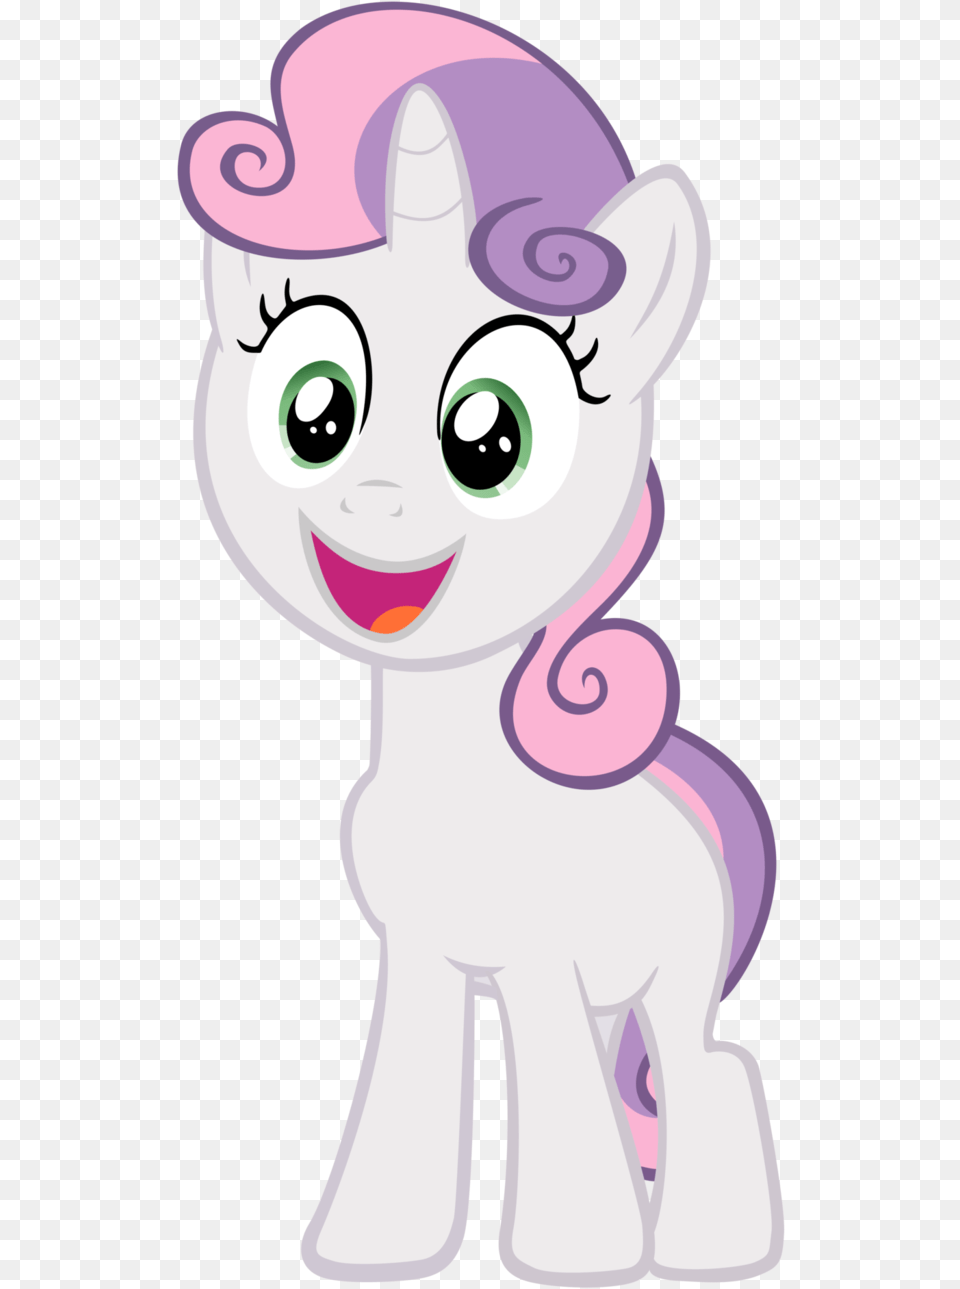 Sweetie Belle Pony Pink Cartoon Purple Mammal Fictional Sweetie Belle Yay, Baby, Person, Art, Face Png Image